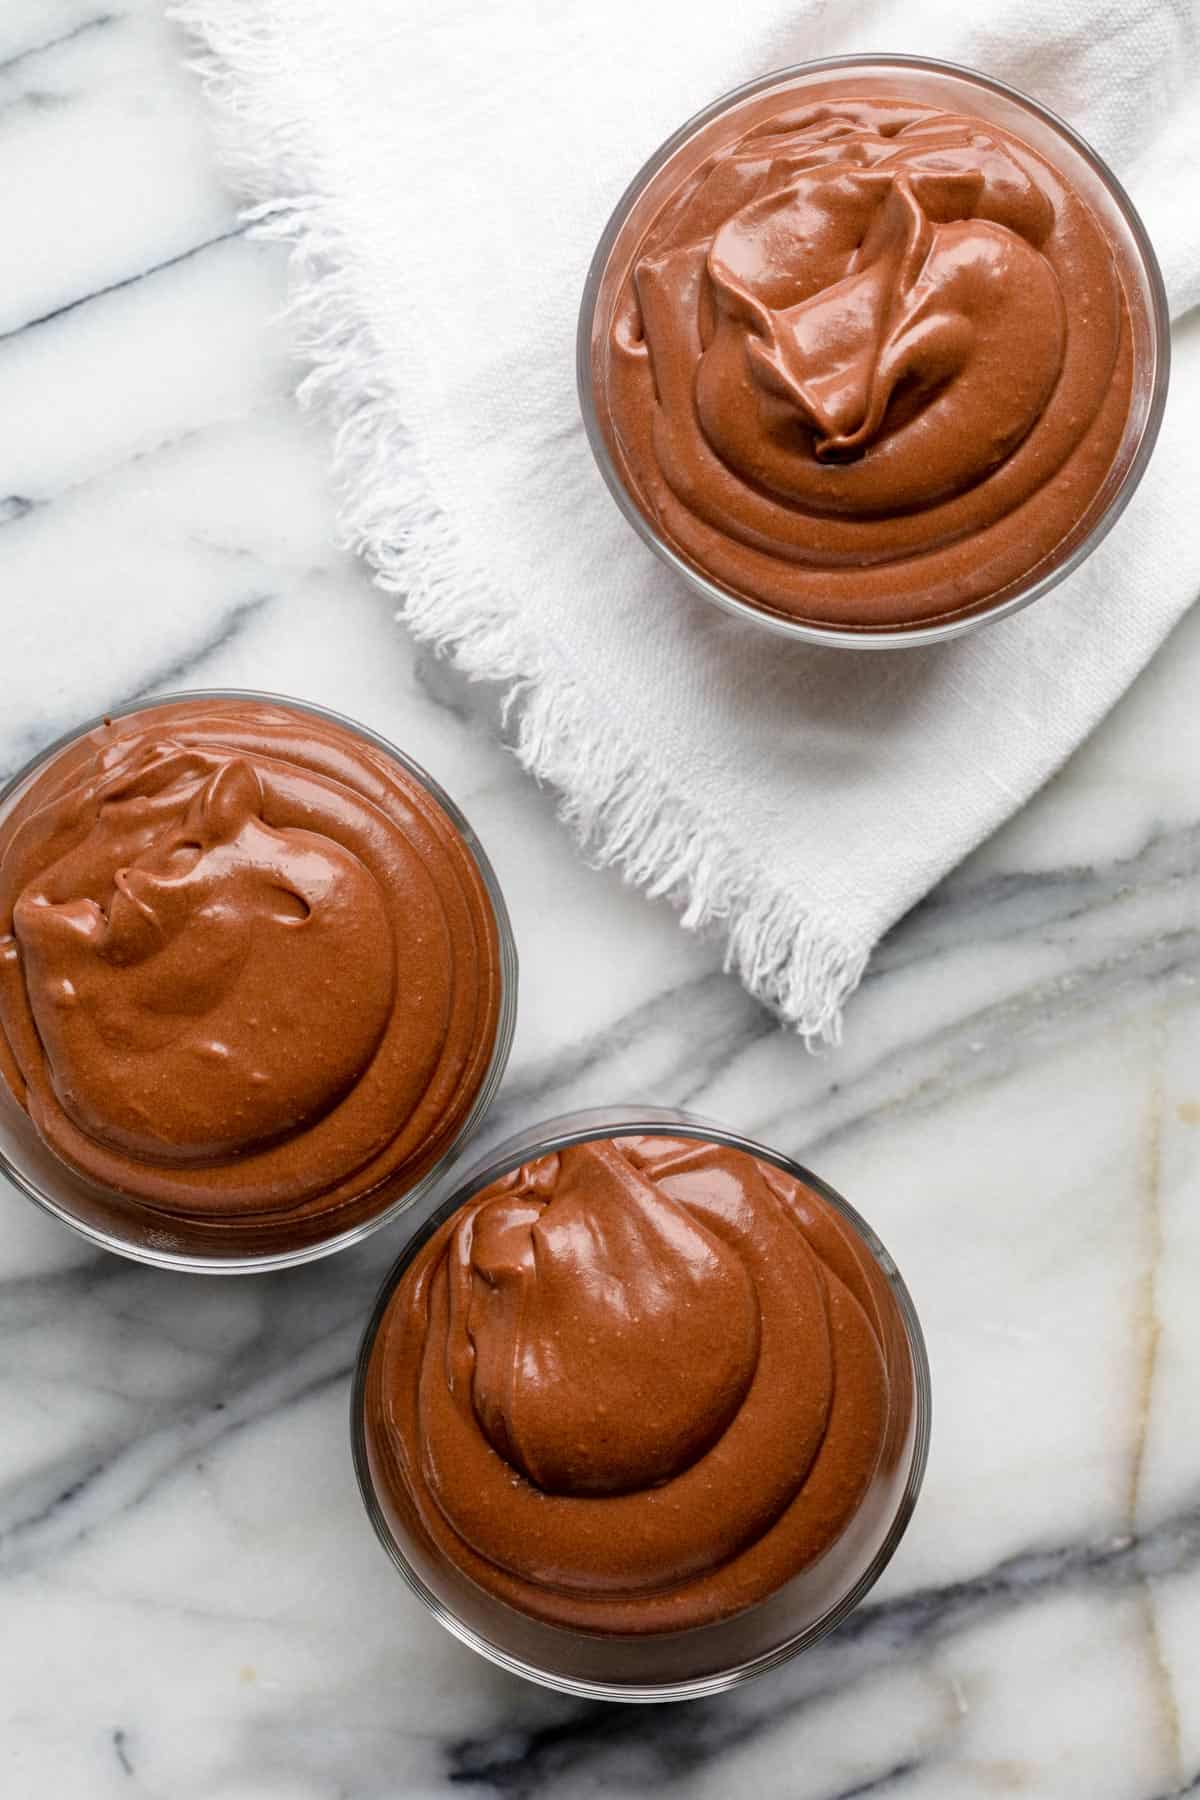 Top view of three cups of chocolate mousse